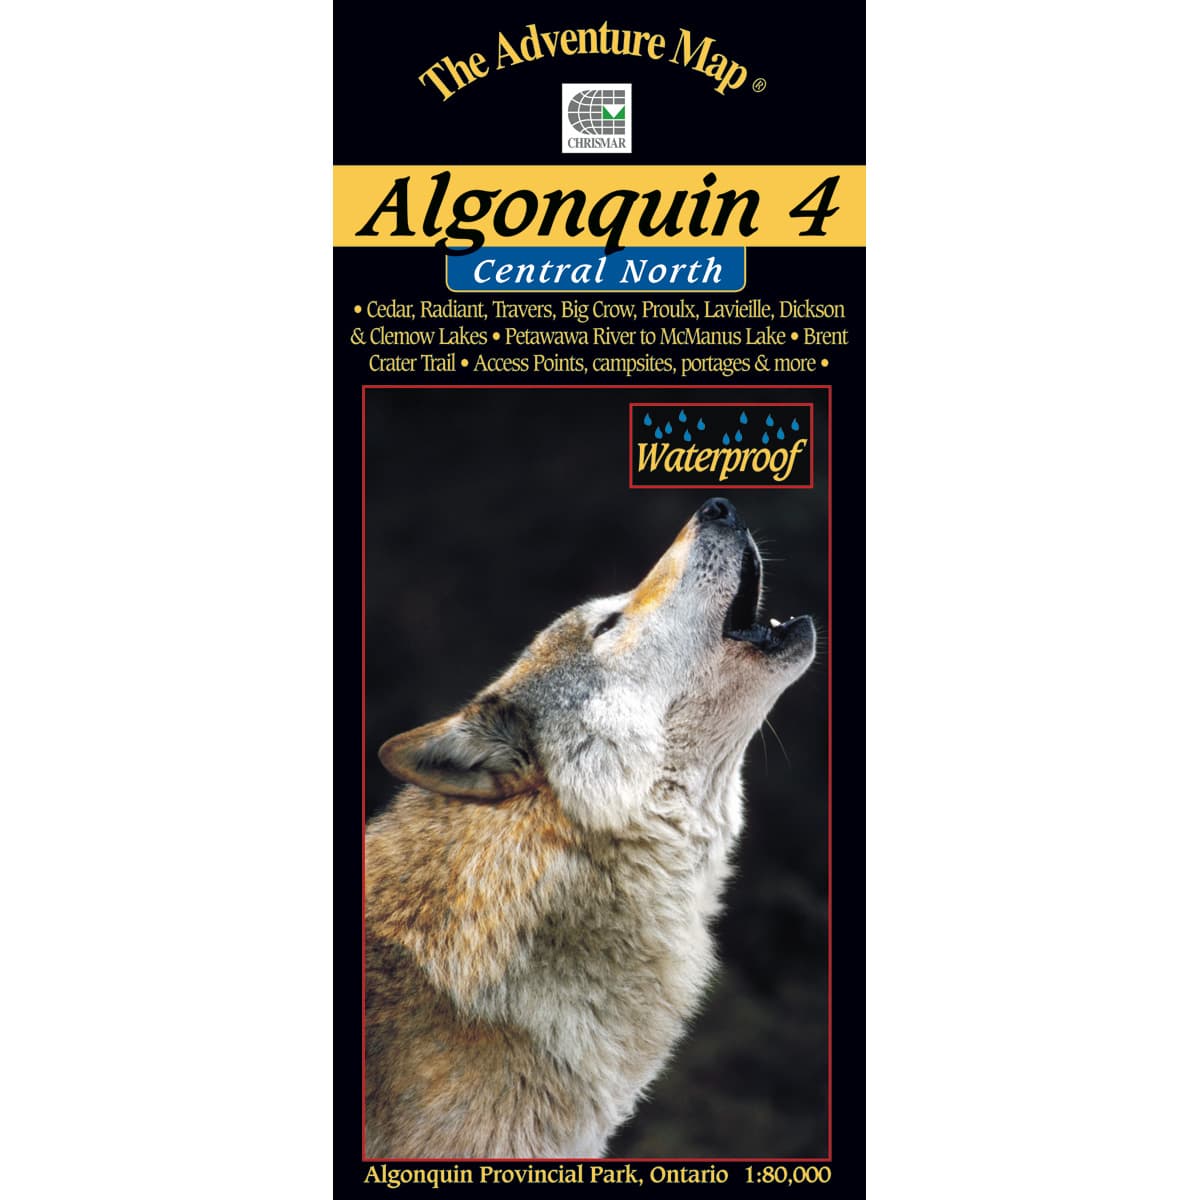 The Adventure Map Algonquin 4 Central North